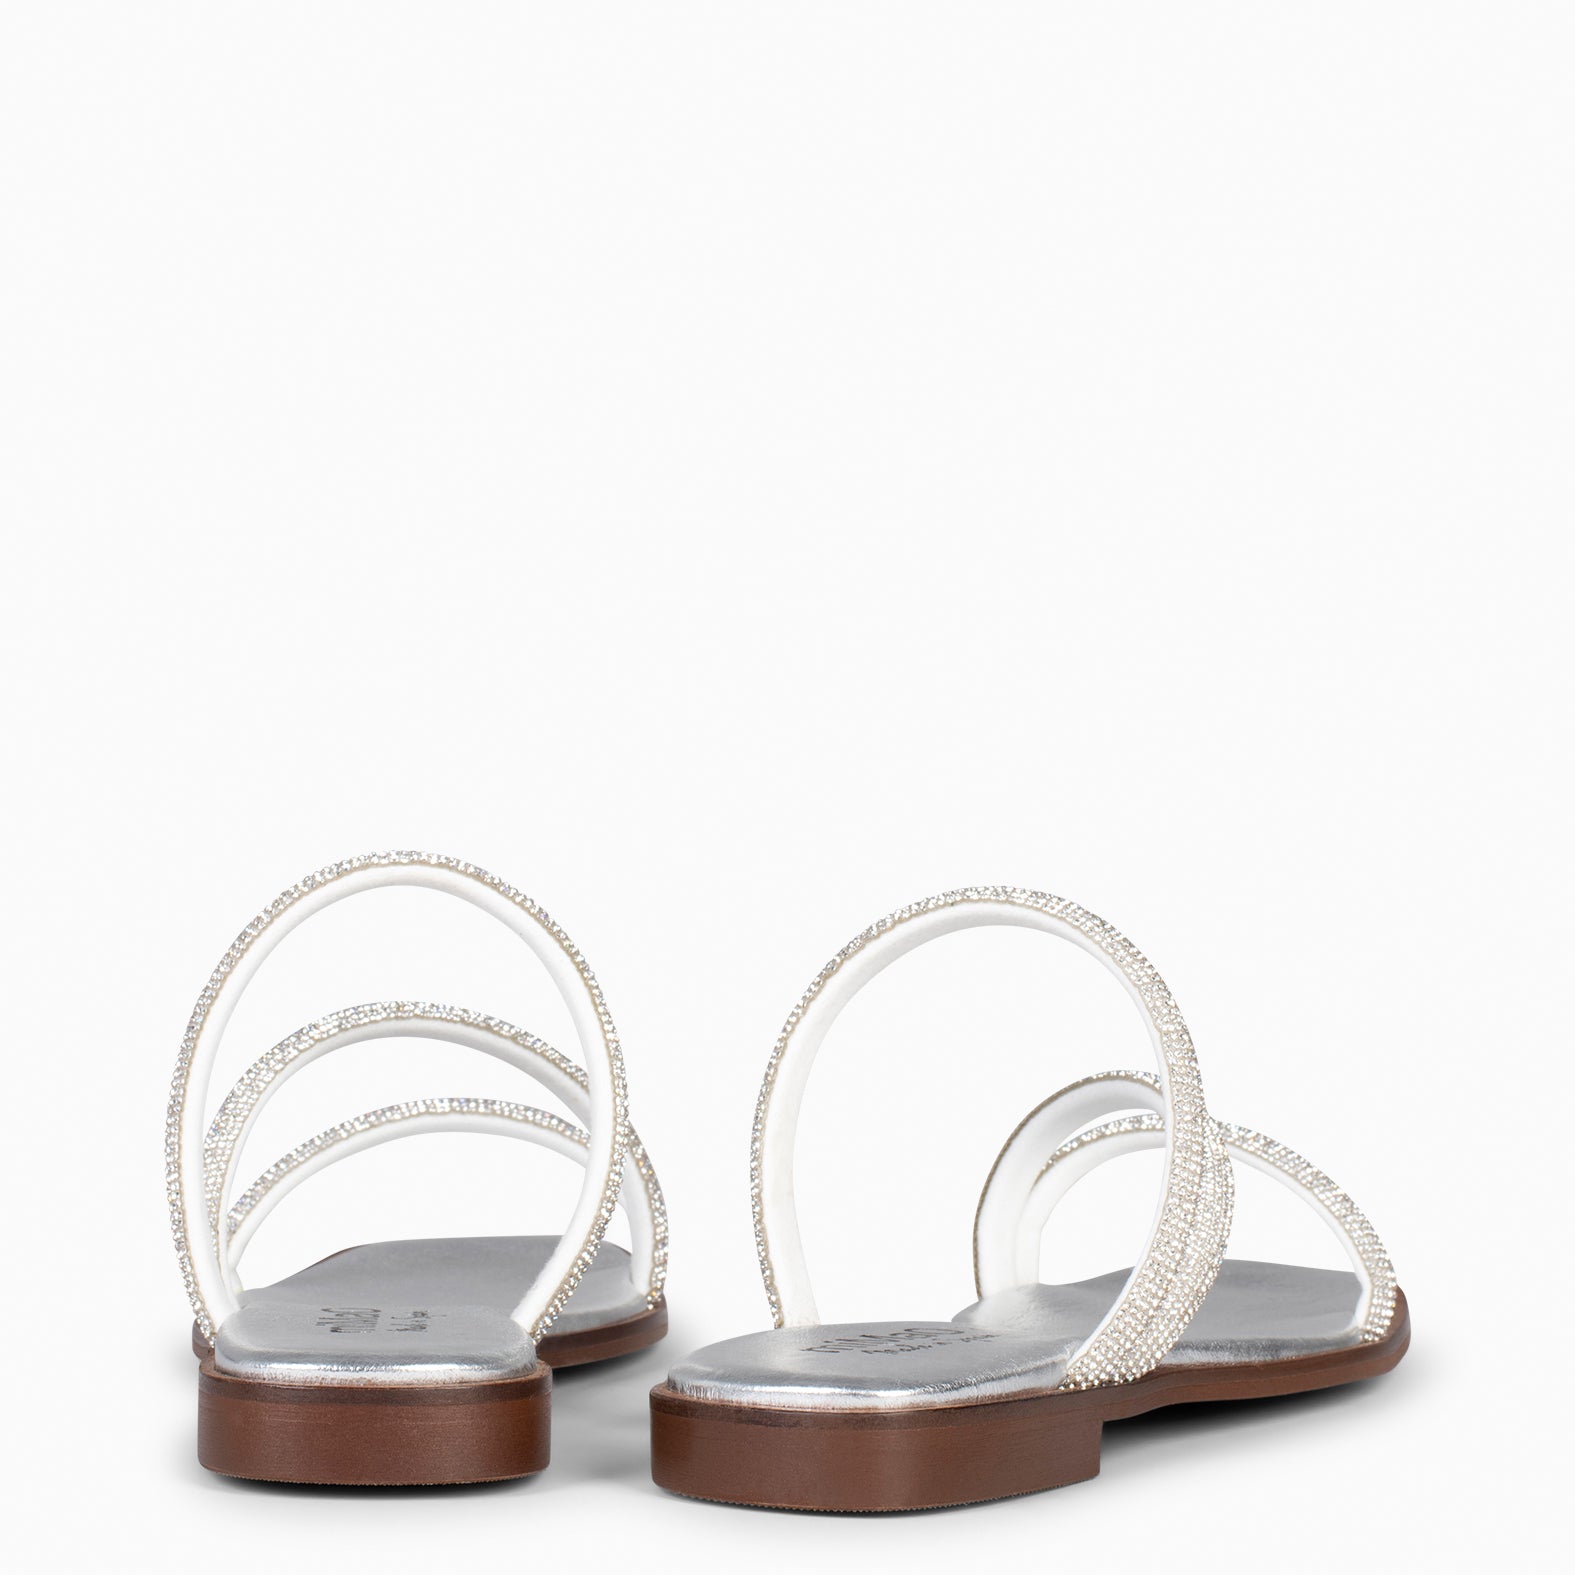 TALLIN - SILVER Flat Sandals with strass straps